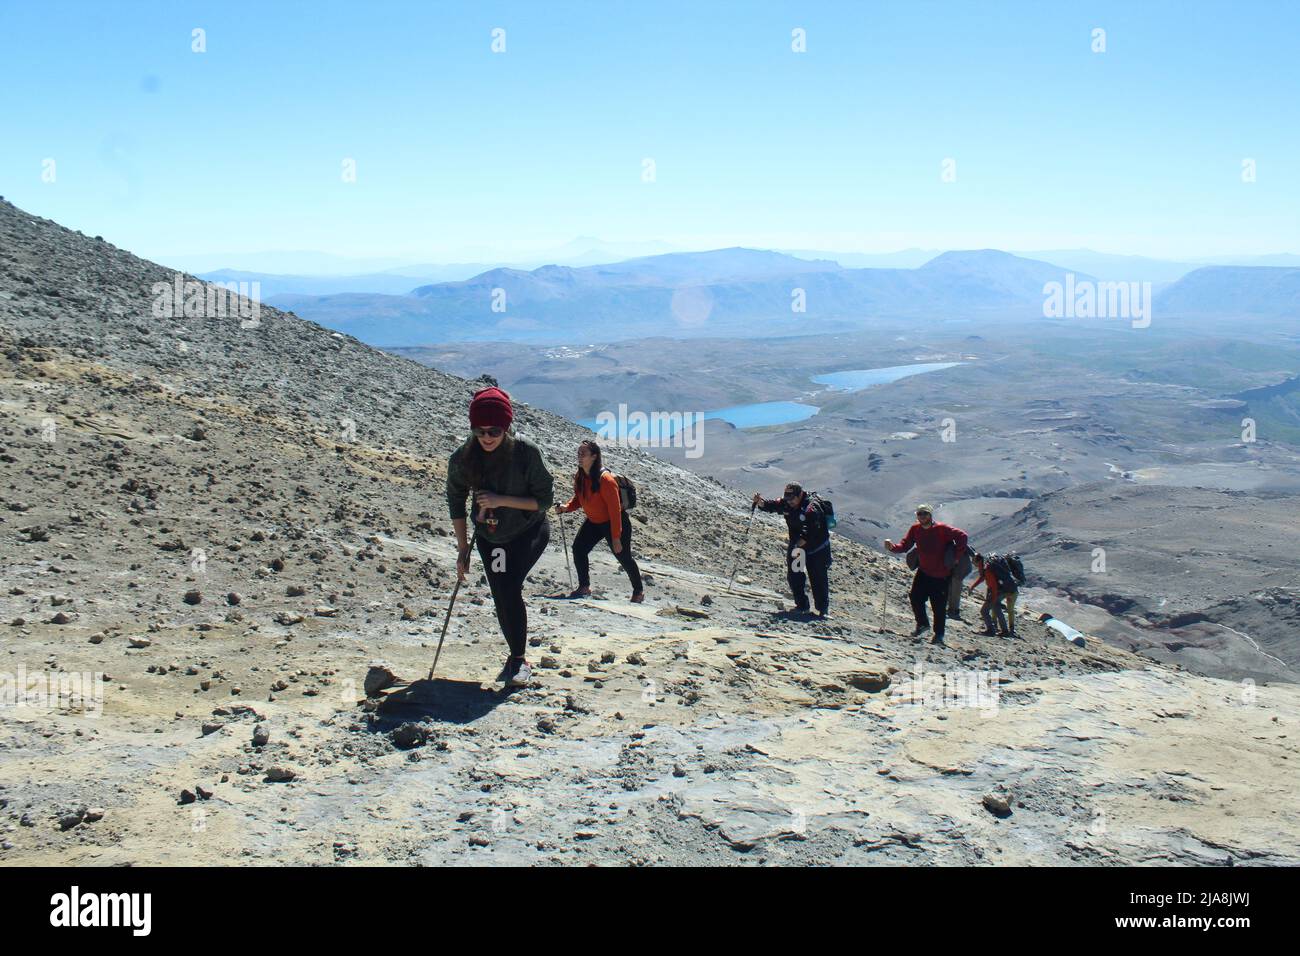 Group of people going up a montain Stock Photo